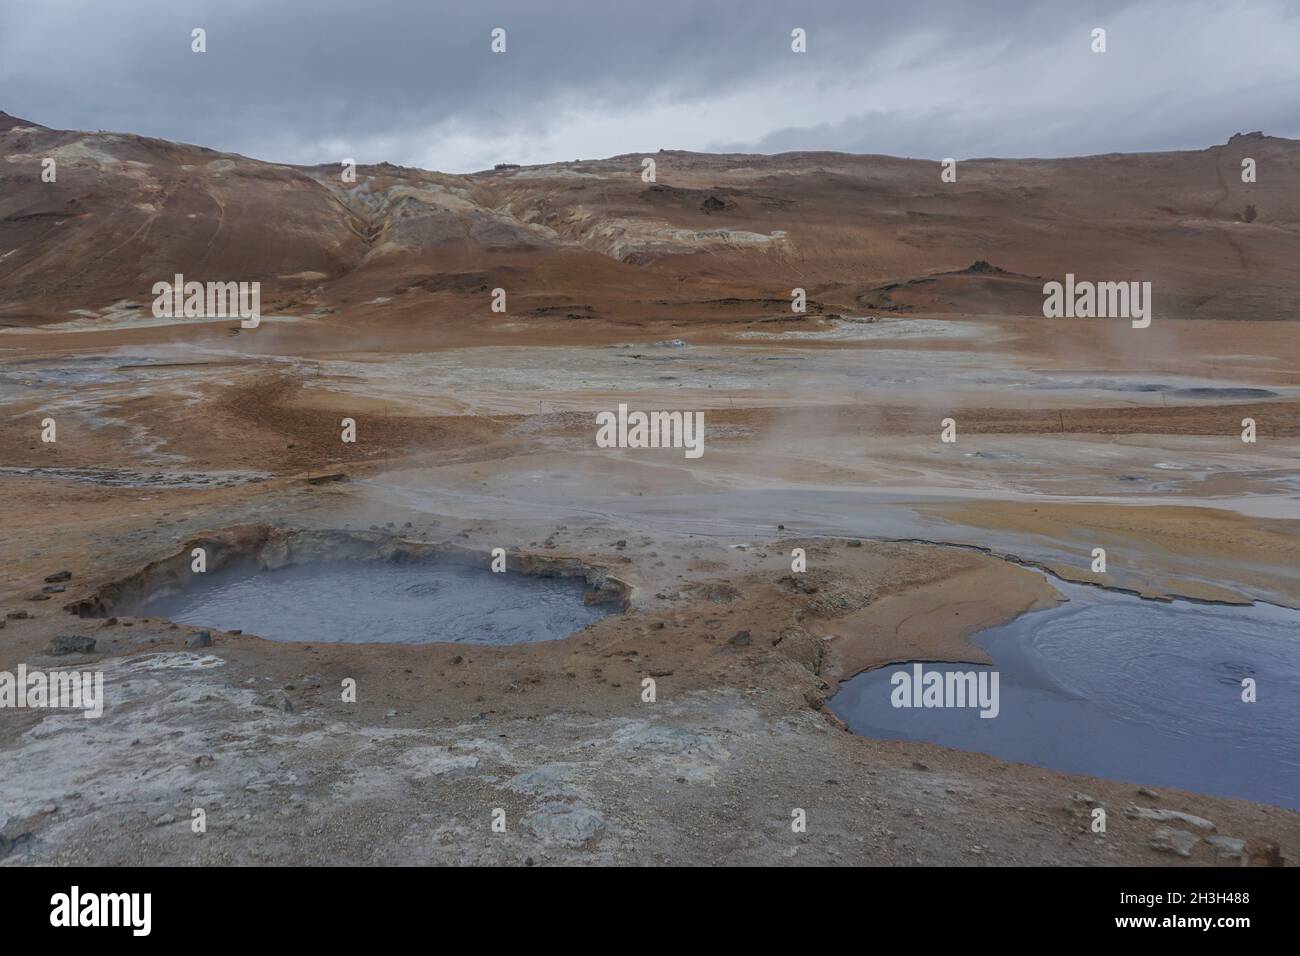 Myvatn Region, Iceland: Namafjall (also known as Hverir) is a high-temperature geothermal area with boiling mud pots and steaming fumaroles. Stock Photo